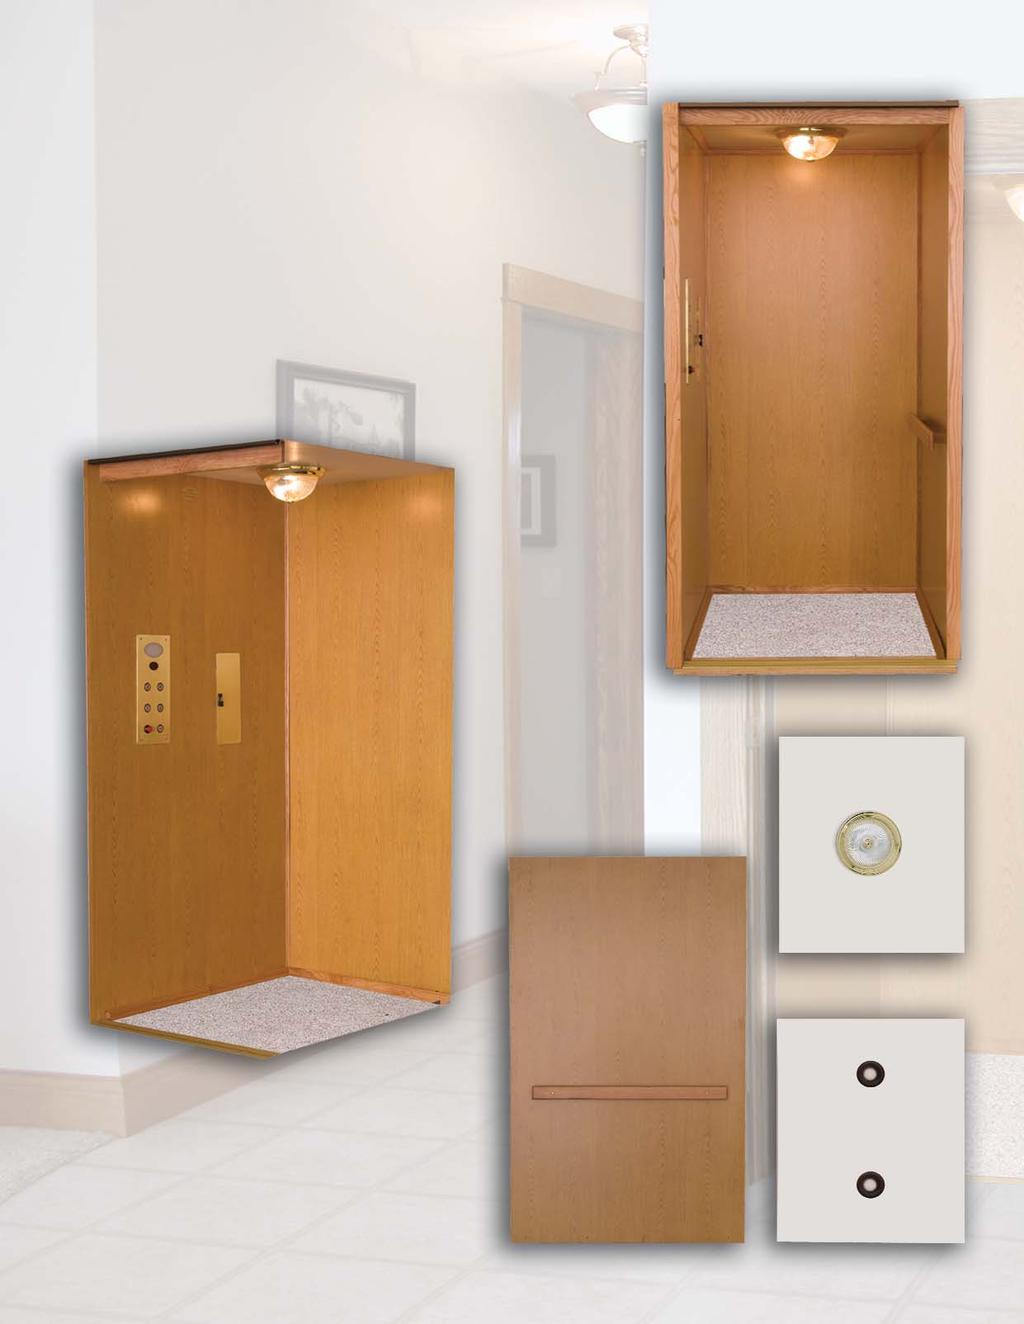 The Destiny Level I Choice of Melamine Colors: Light Oak, Dark Oak, and White Globe Light Fixture - Brass or Nickel Plated (Optional 2 or 4 Recessed Lights) Wood Handrail Brushed Stainless Steel or